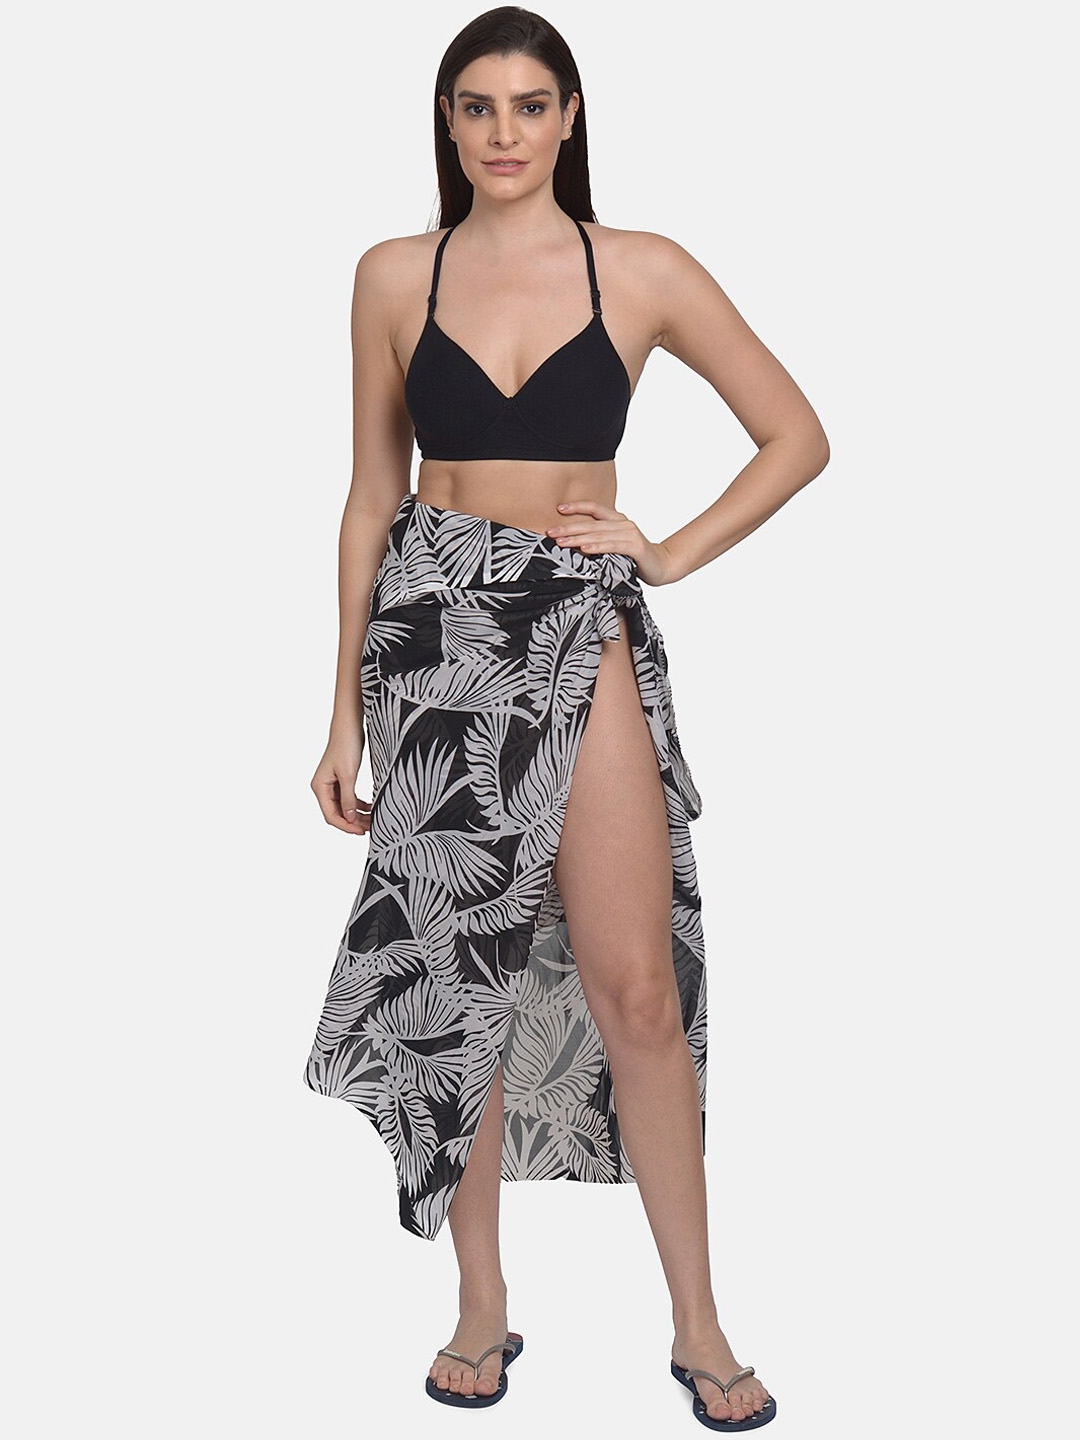 Sheer Sarong Swimsuit Cover Up Wrap / Geometric White And Gray